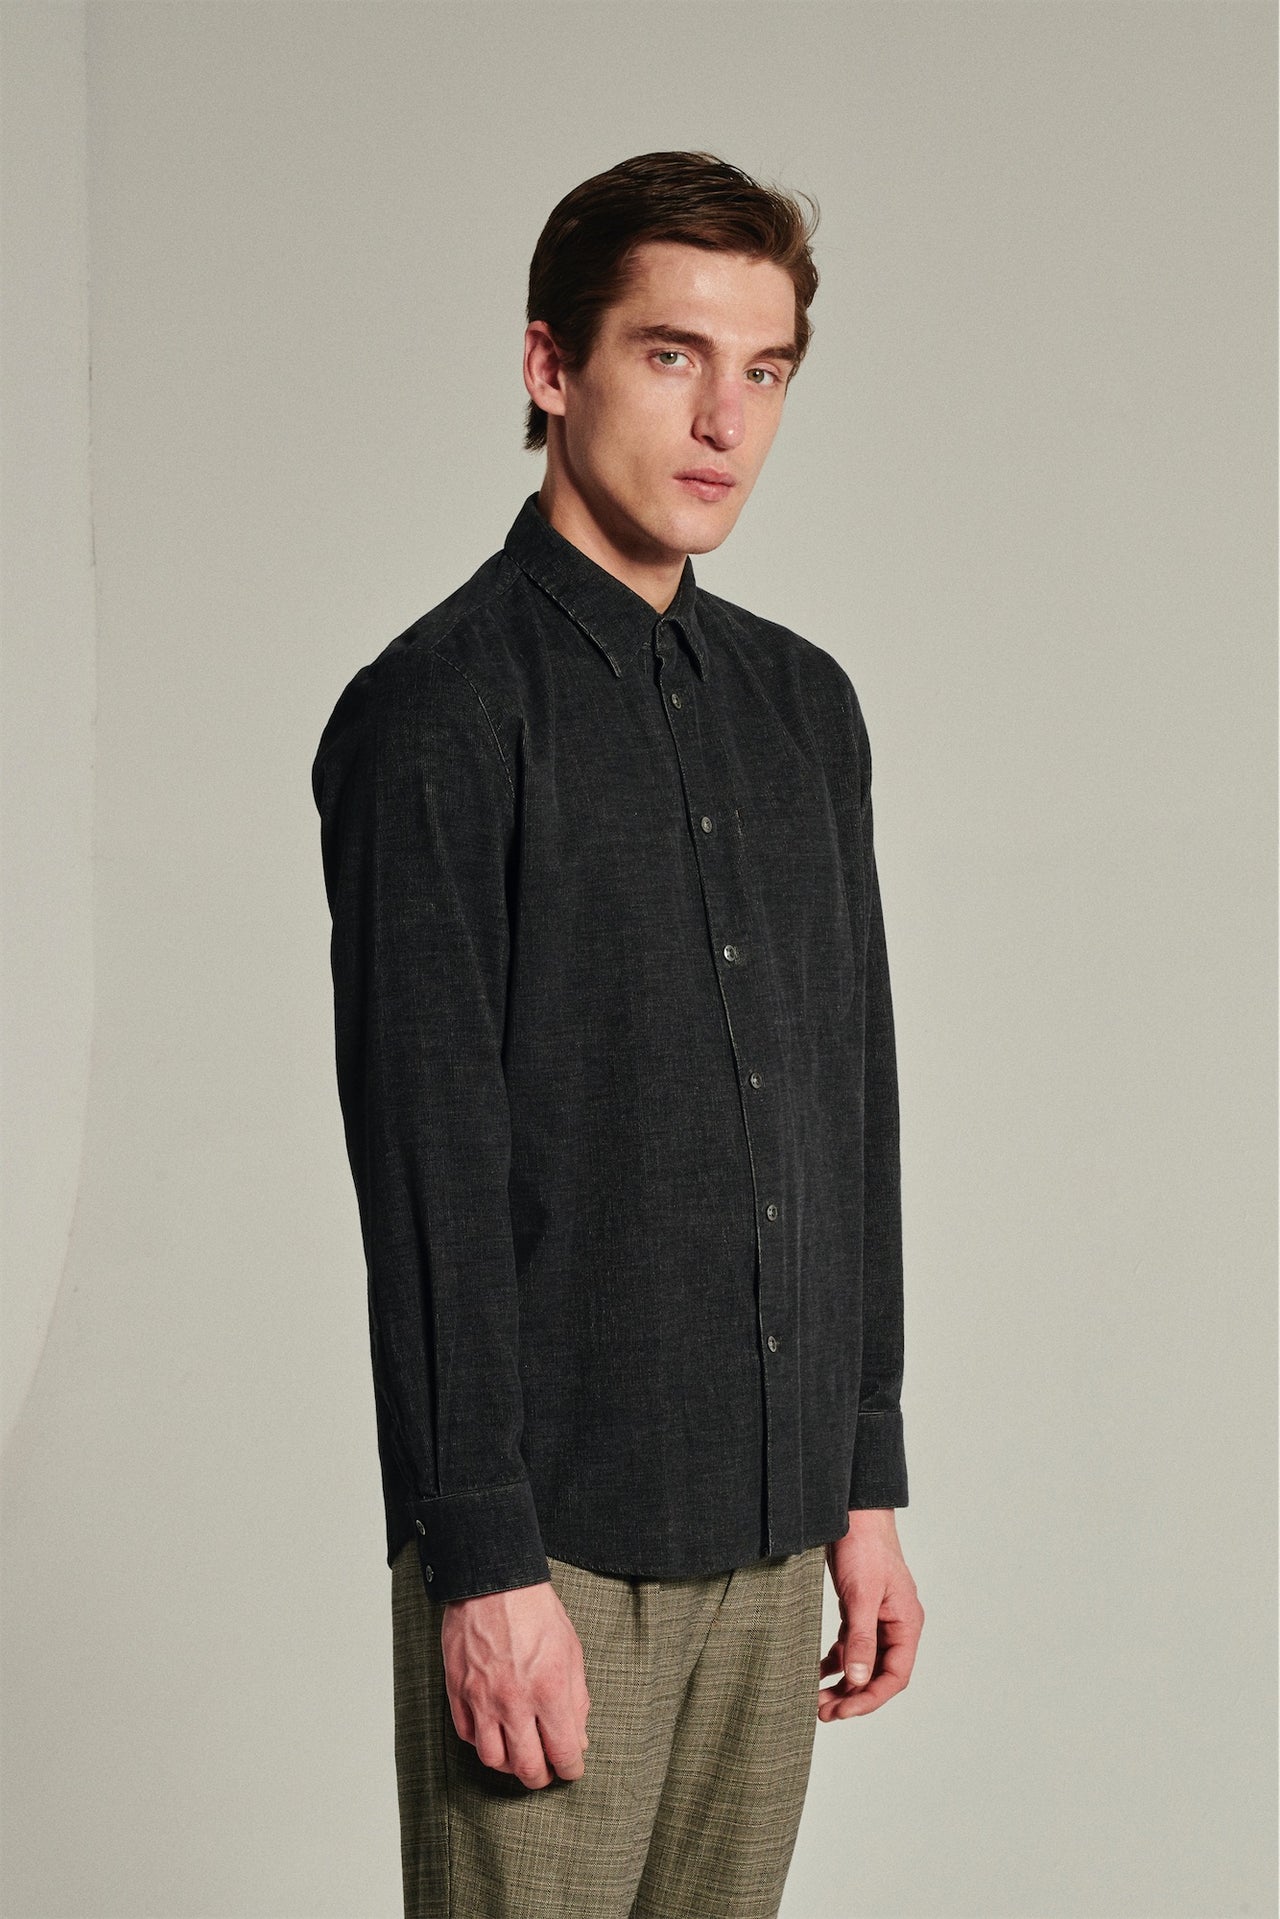 Feel Good Shirt in an Anthracite Grey Japanese Baby Corduroy Cotton